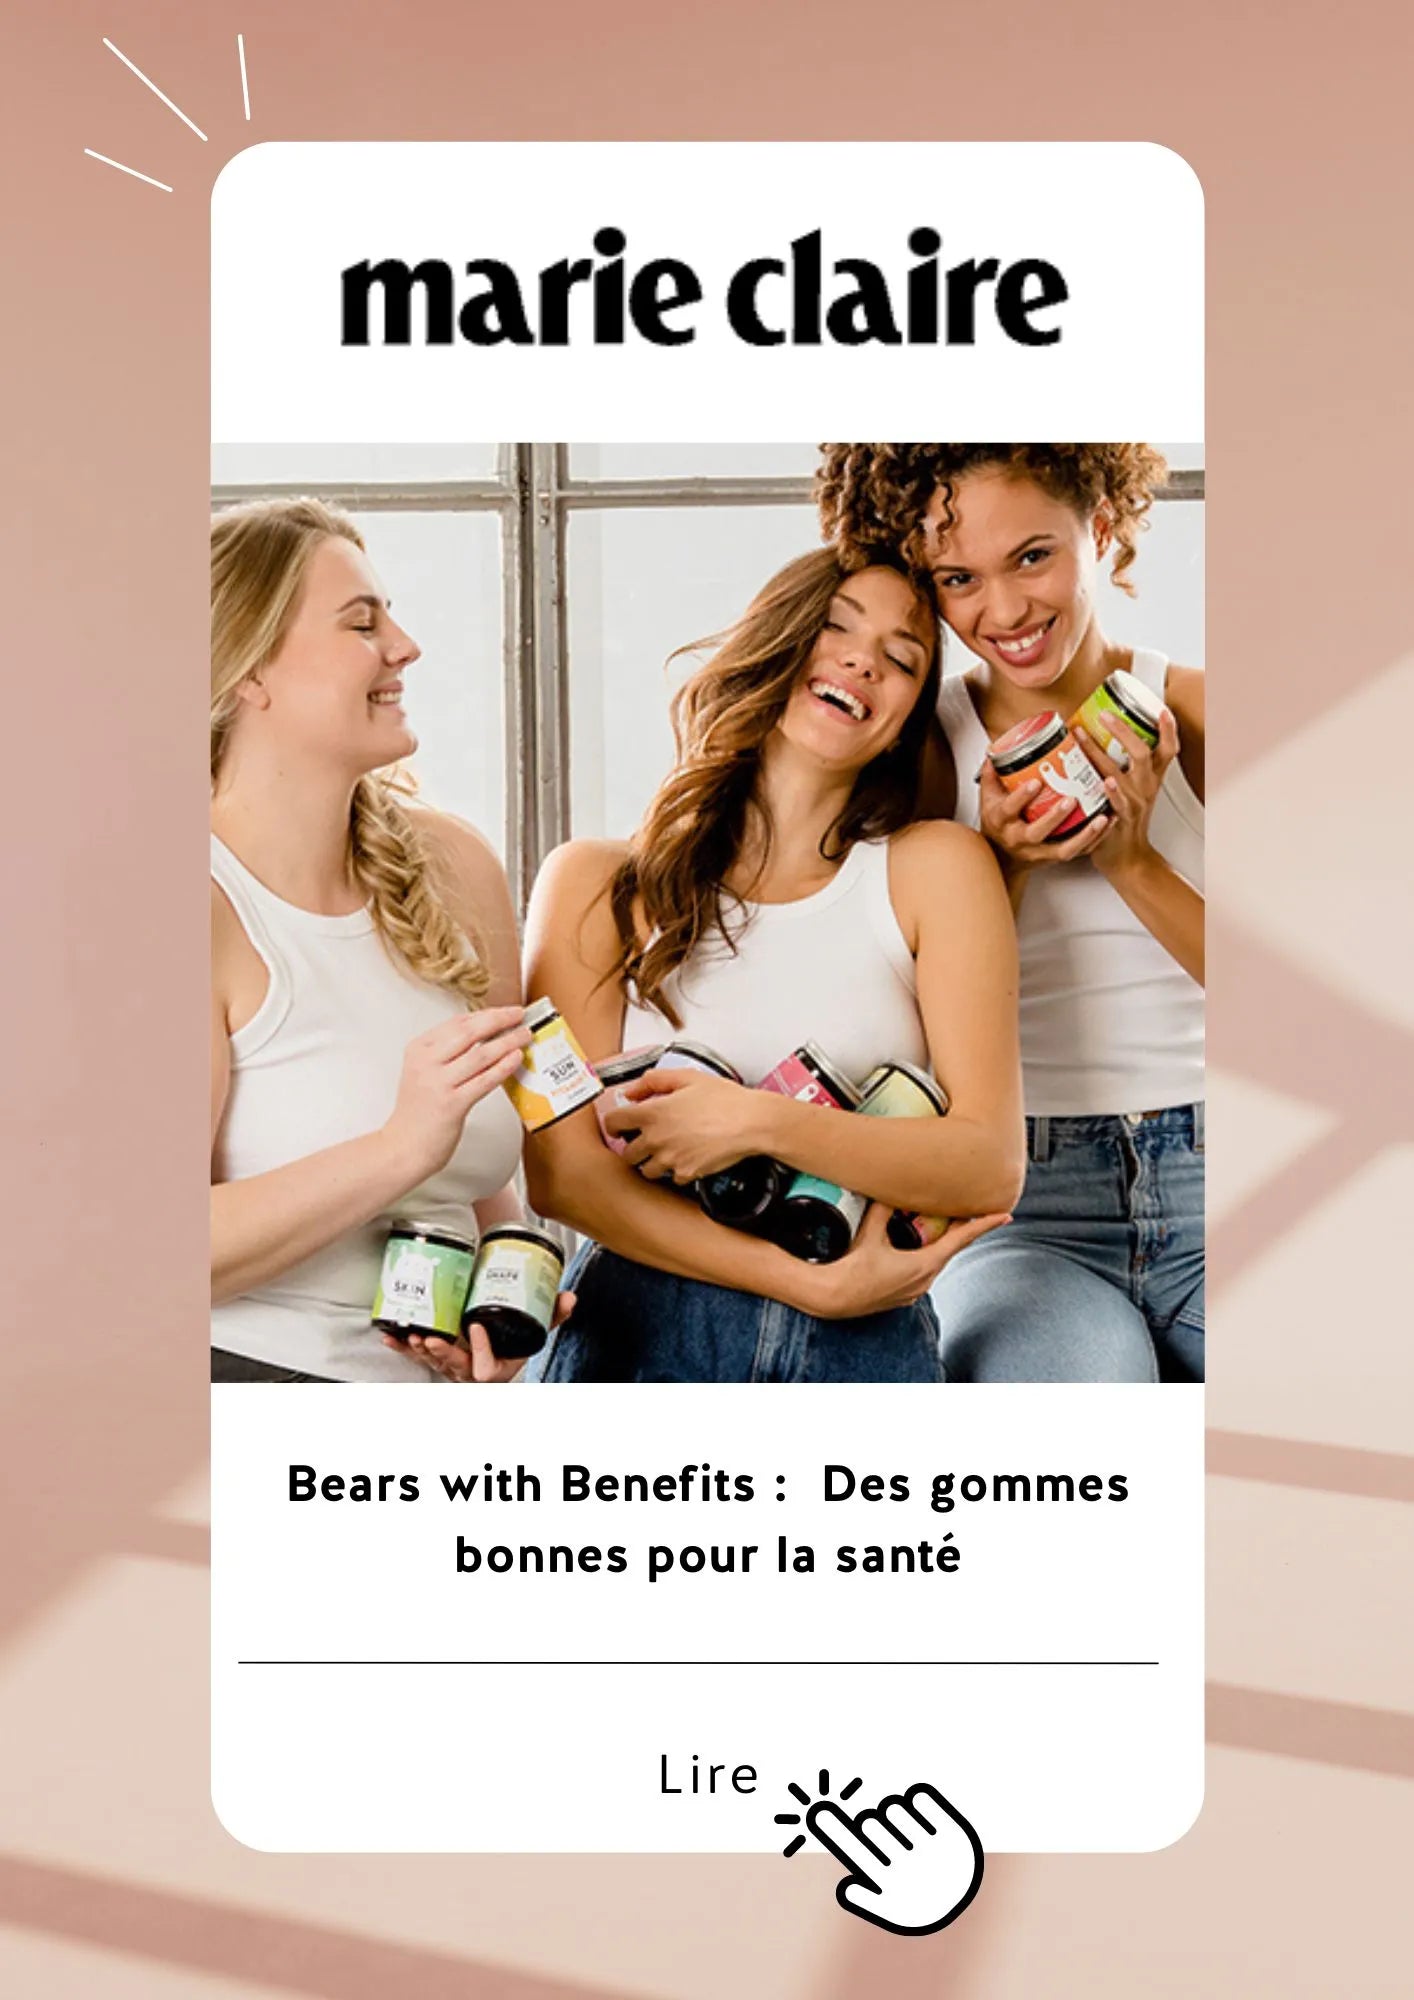 Bears with Benefits in Marie Claire